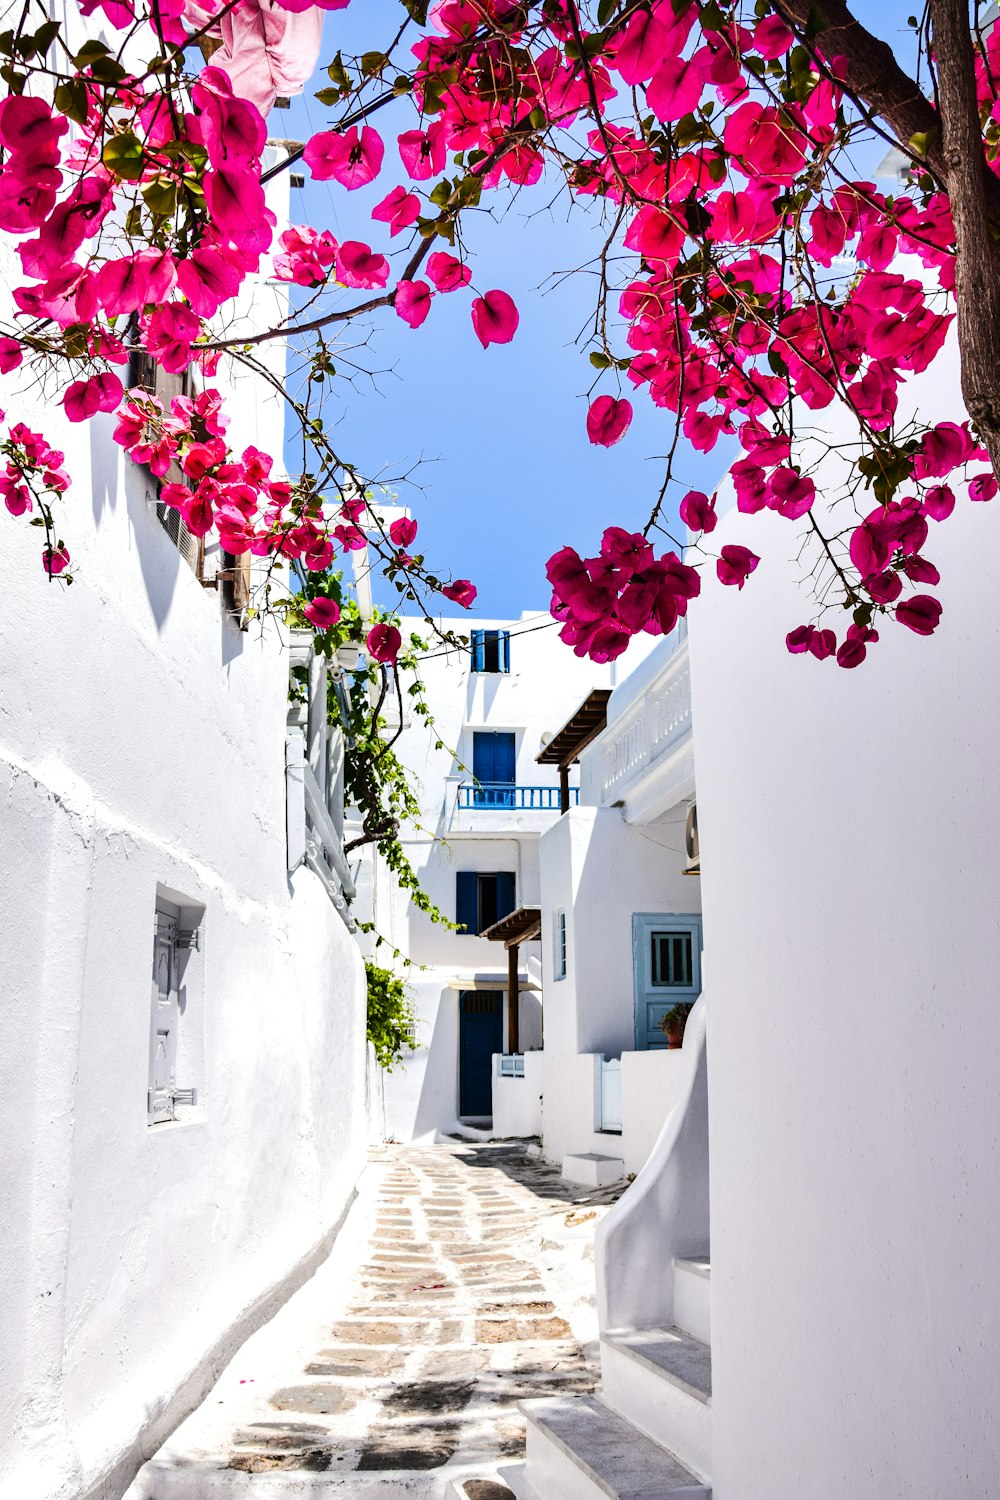 a narrow street with white buildings and pink flowers